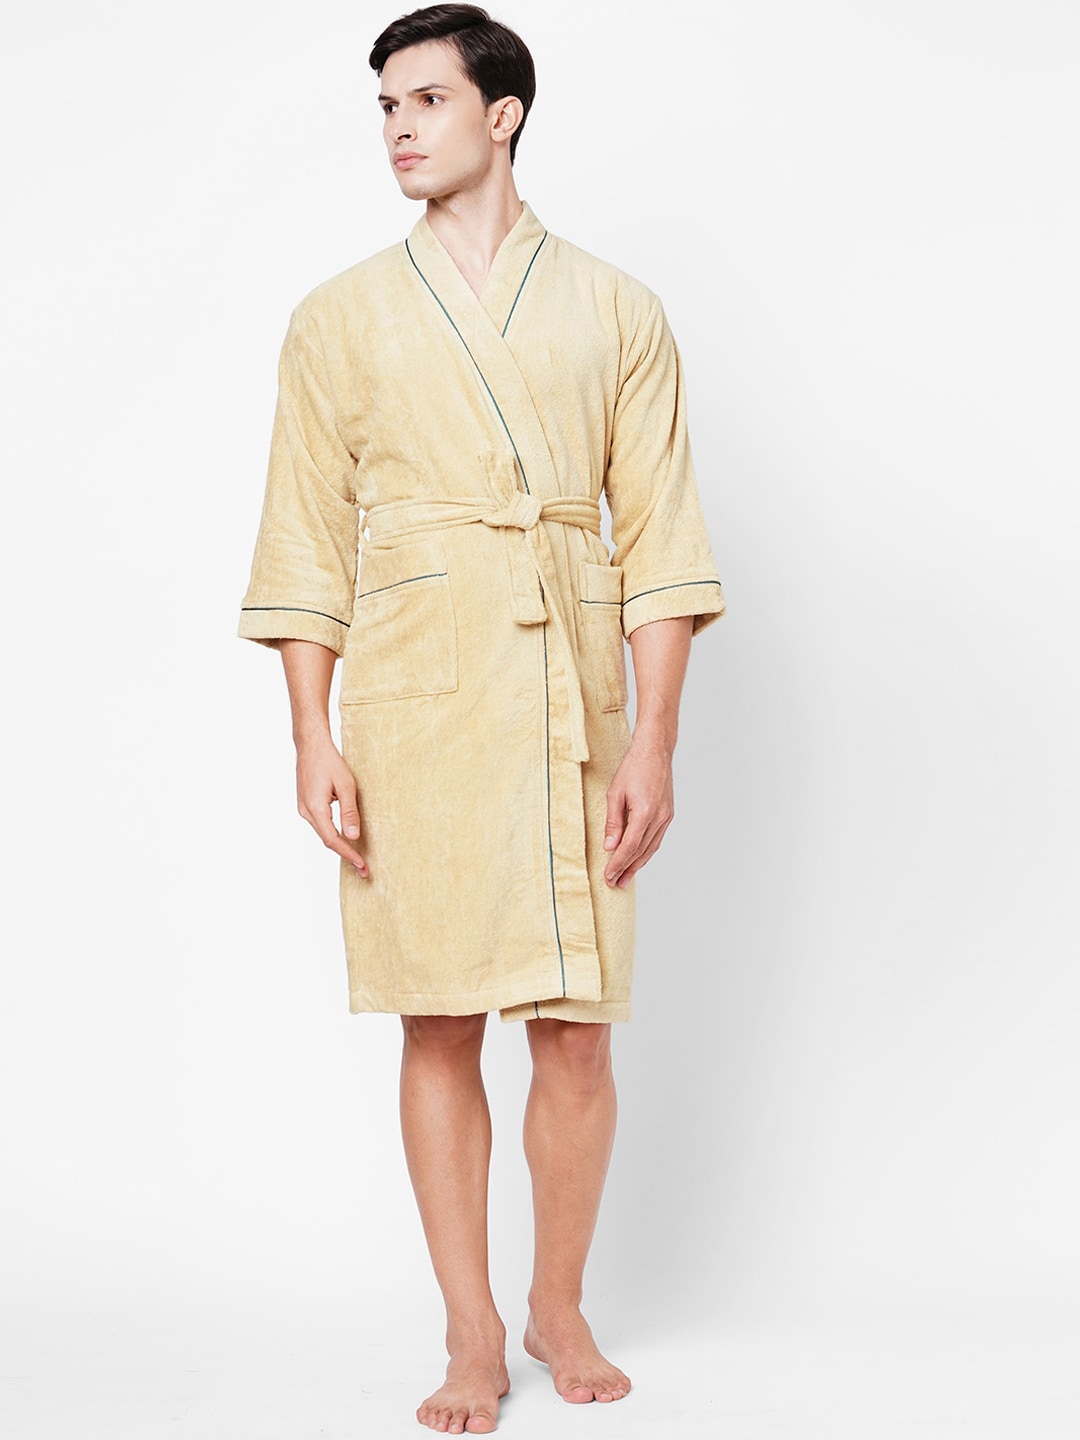 SPACES Unisex Beige Solid Pure Cotton Quick Dry High Loft Ultra Soft Bath Robe Price in India